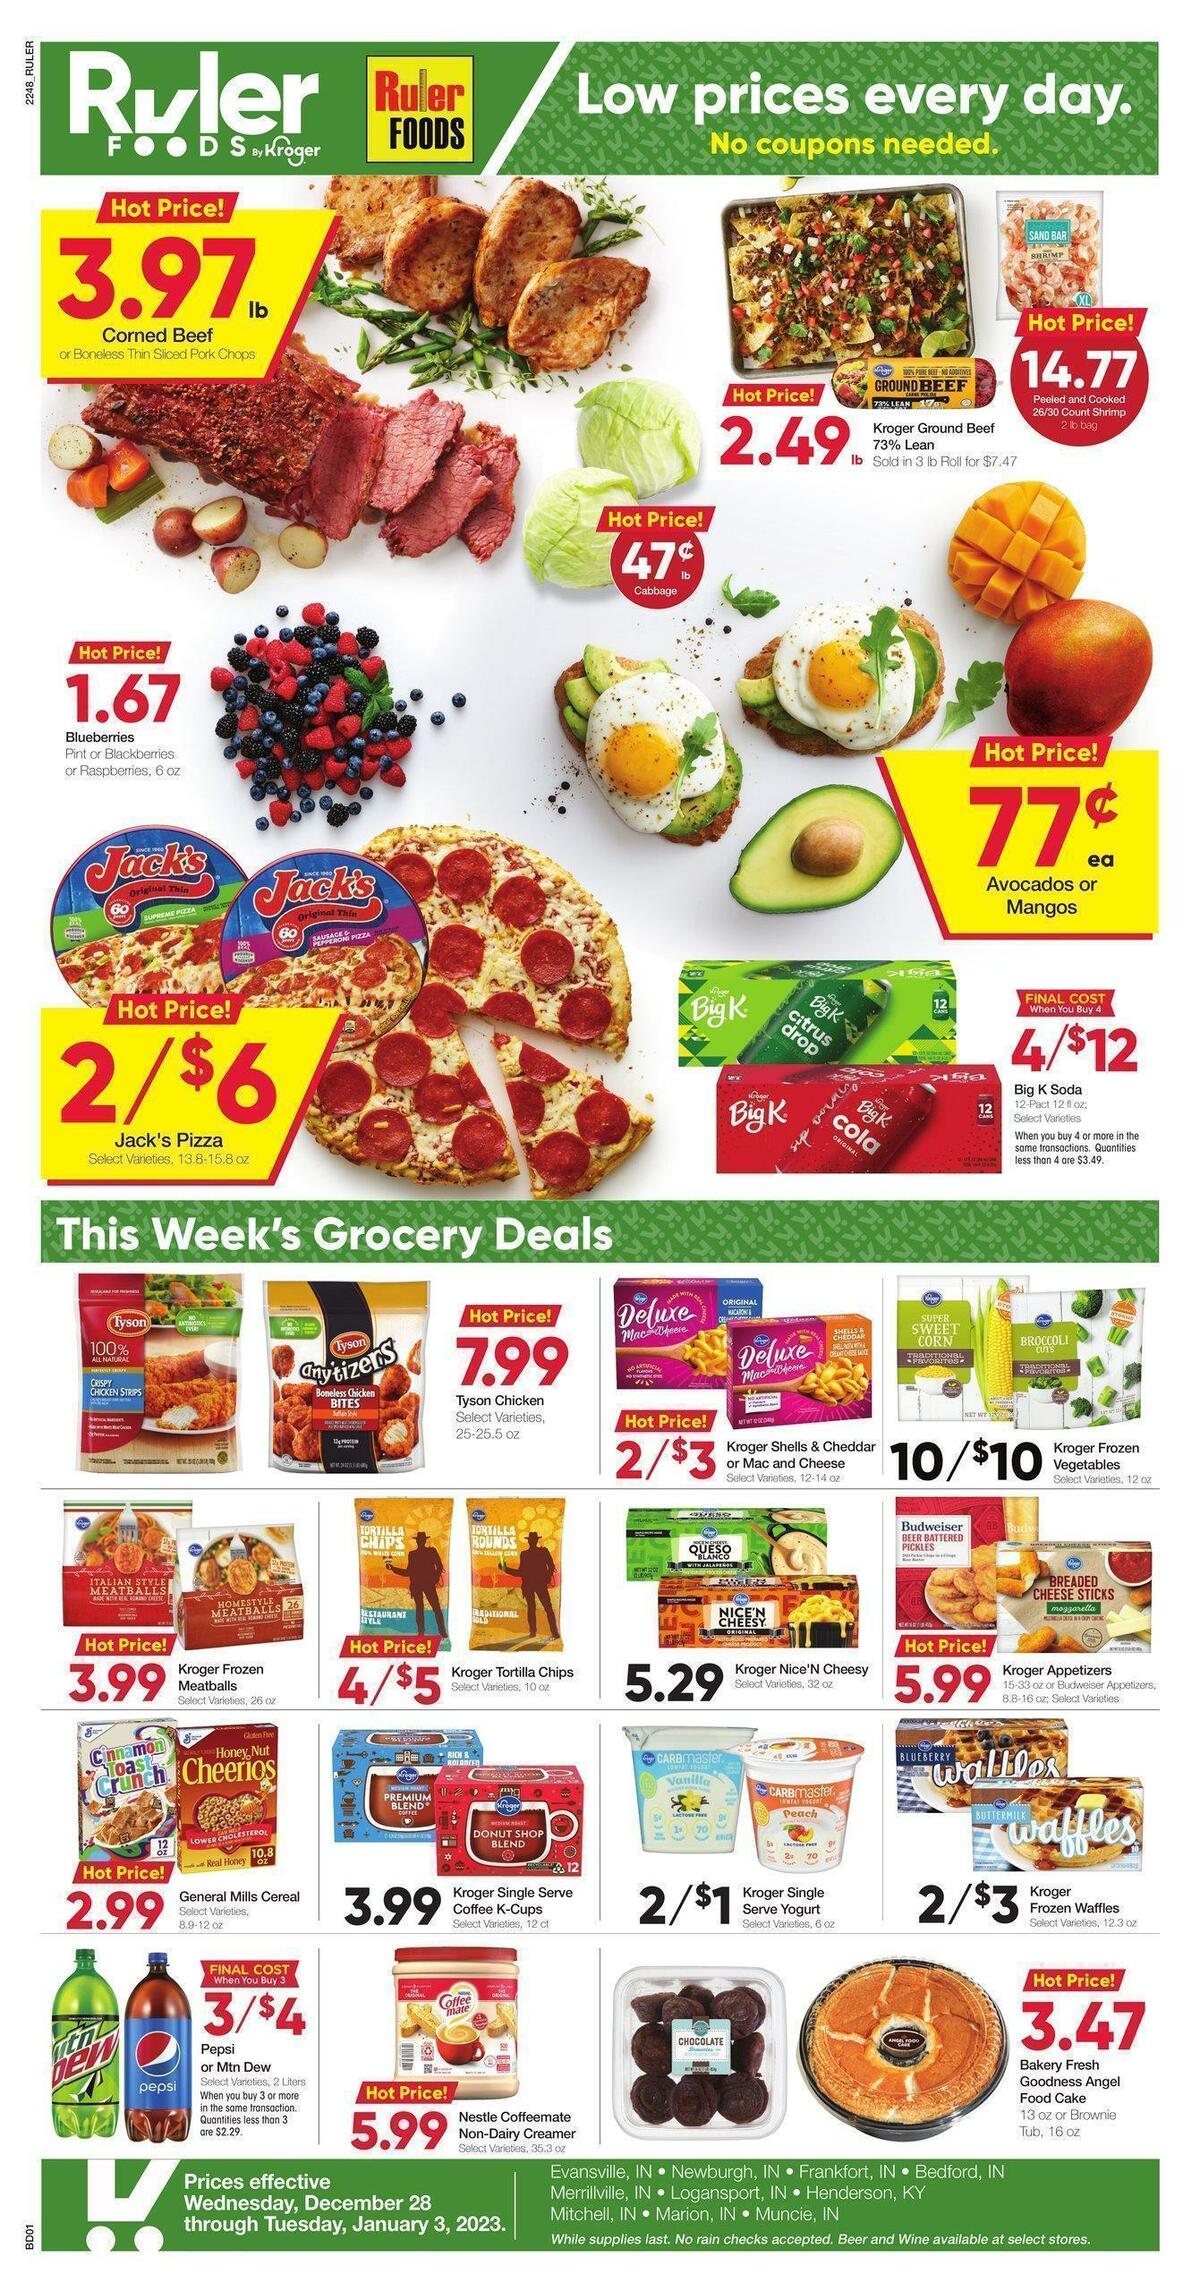 Ruler Foods Weekly Ad from December 28